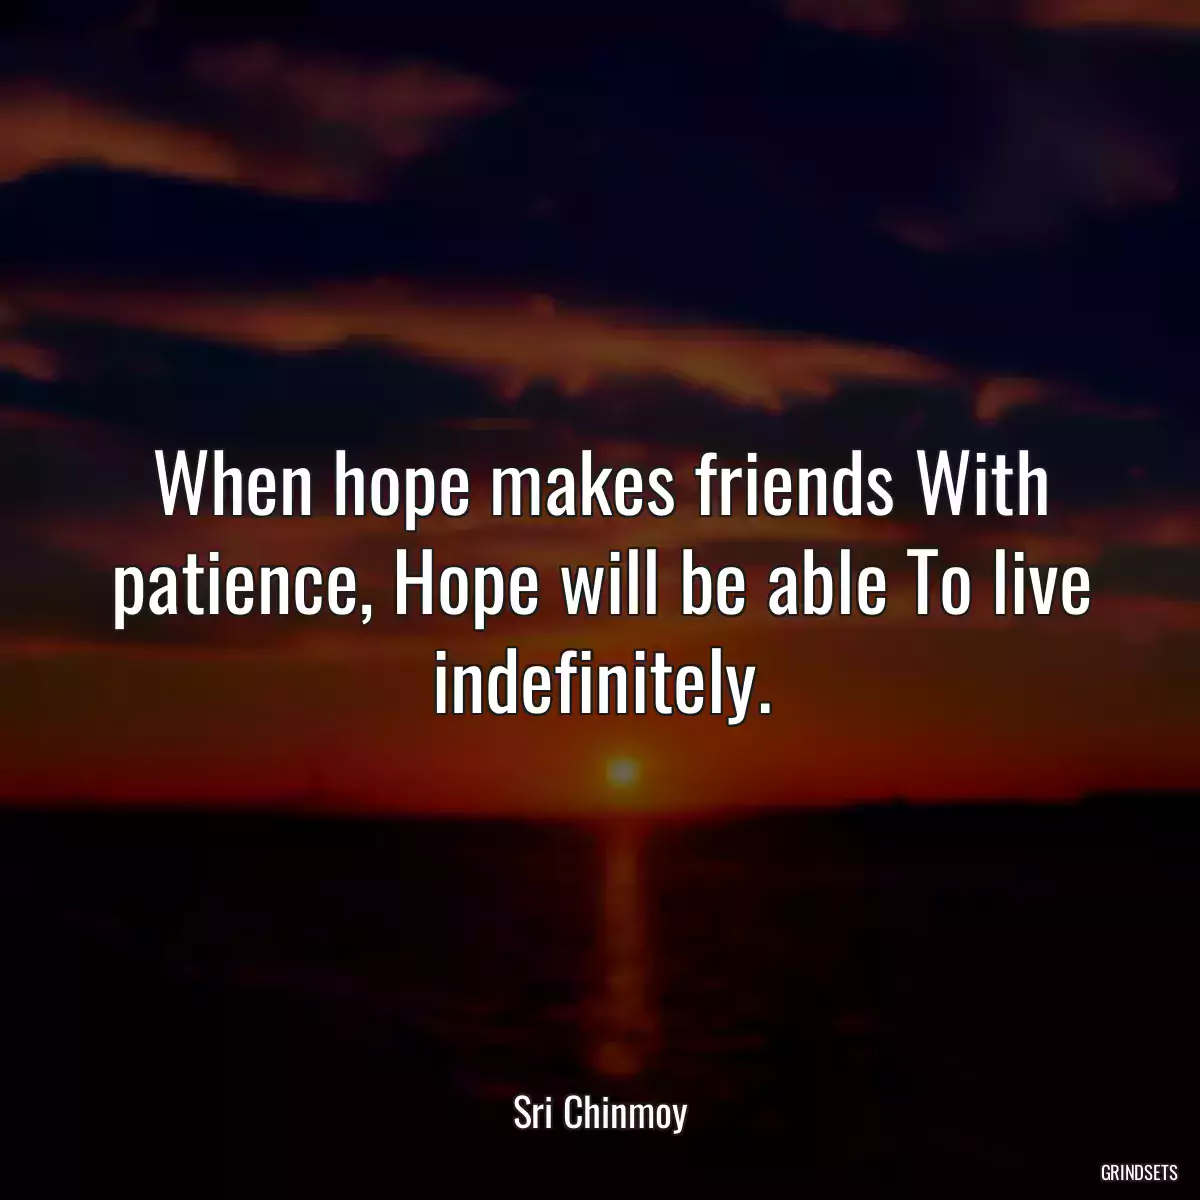 When hope makes friends With patience, Hope will be able To live indefinitely.